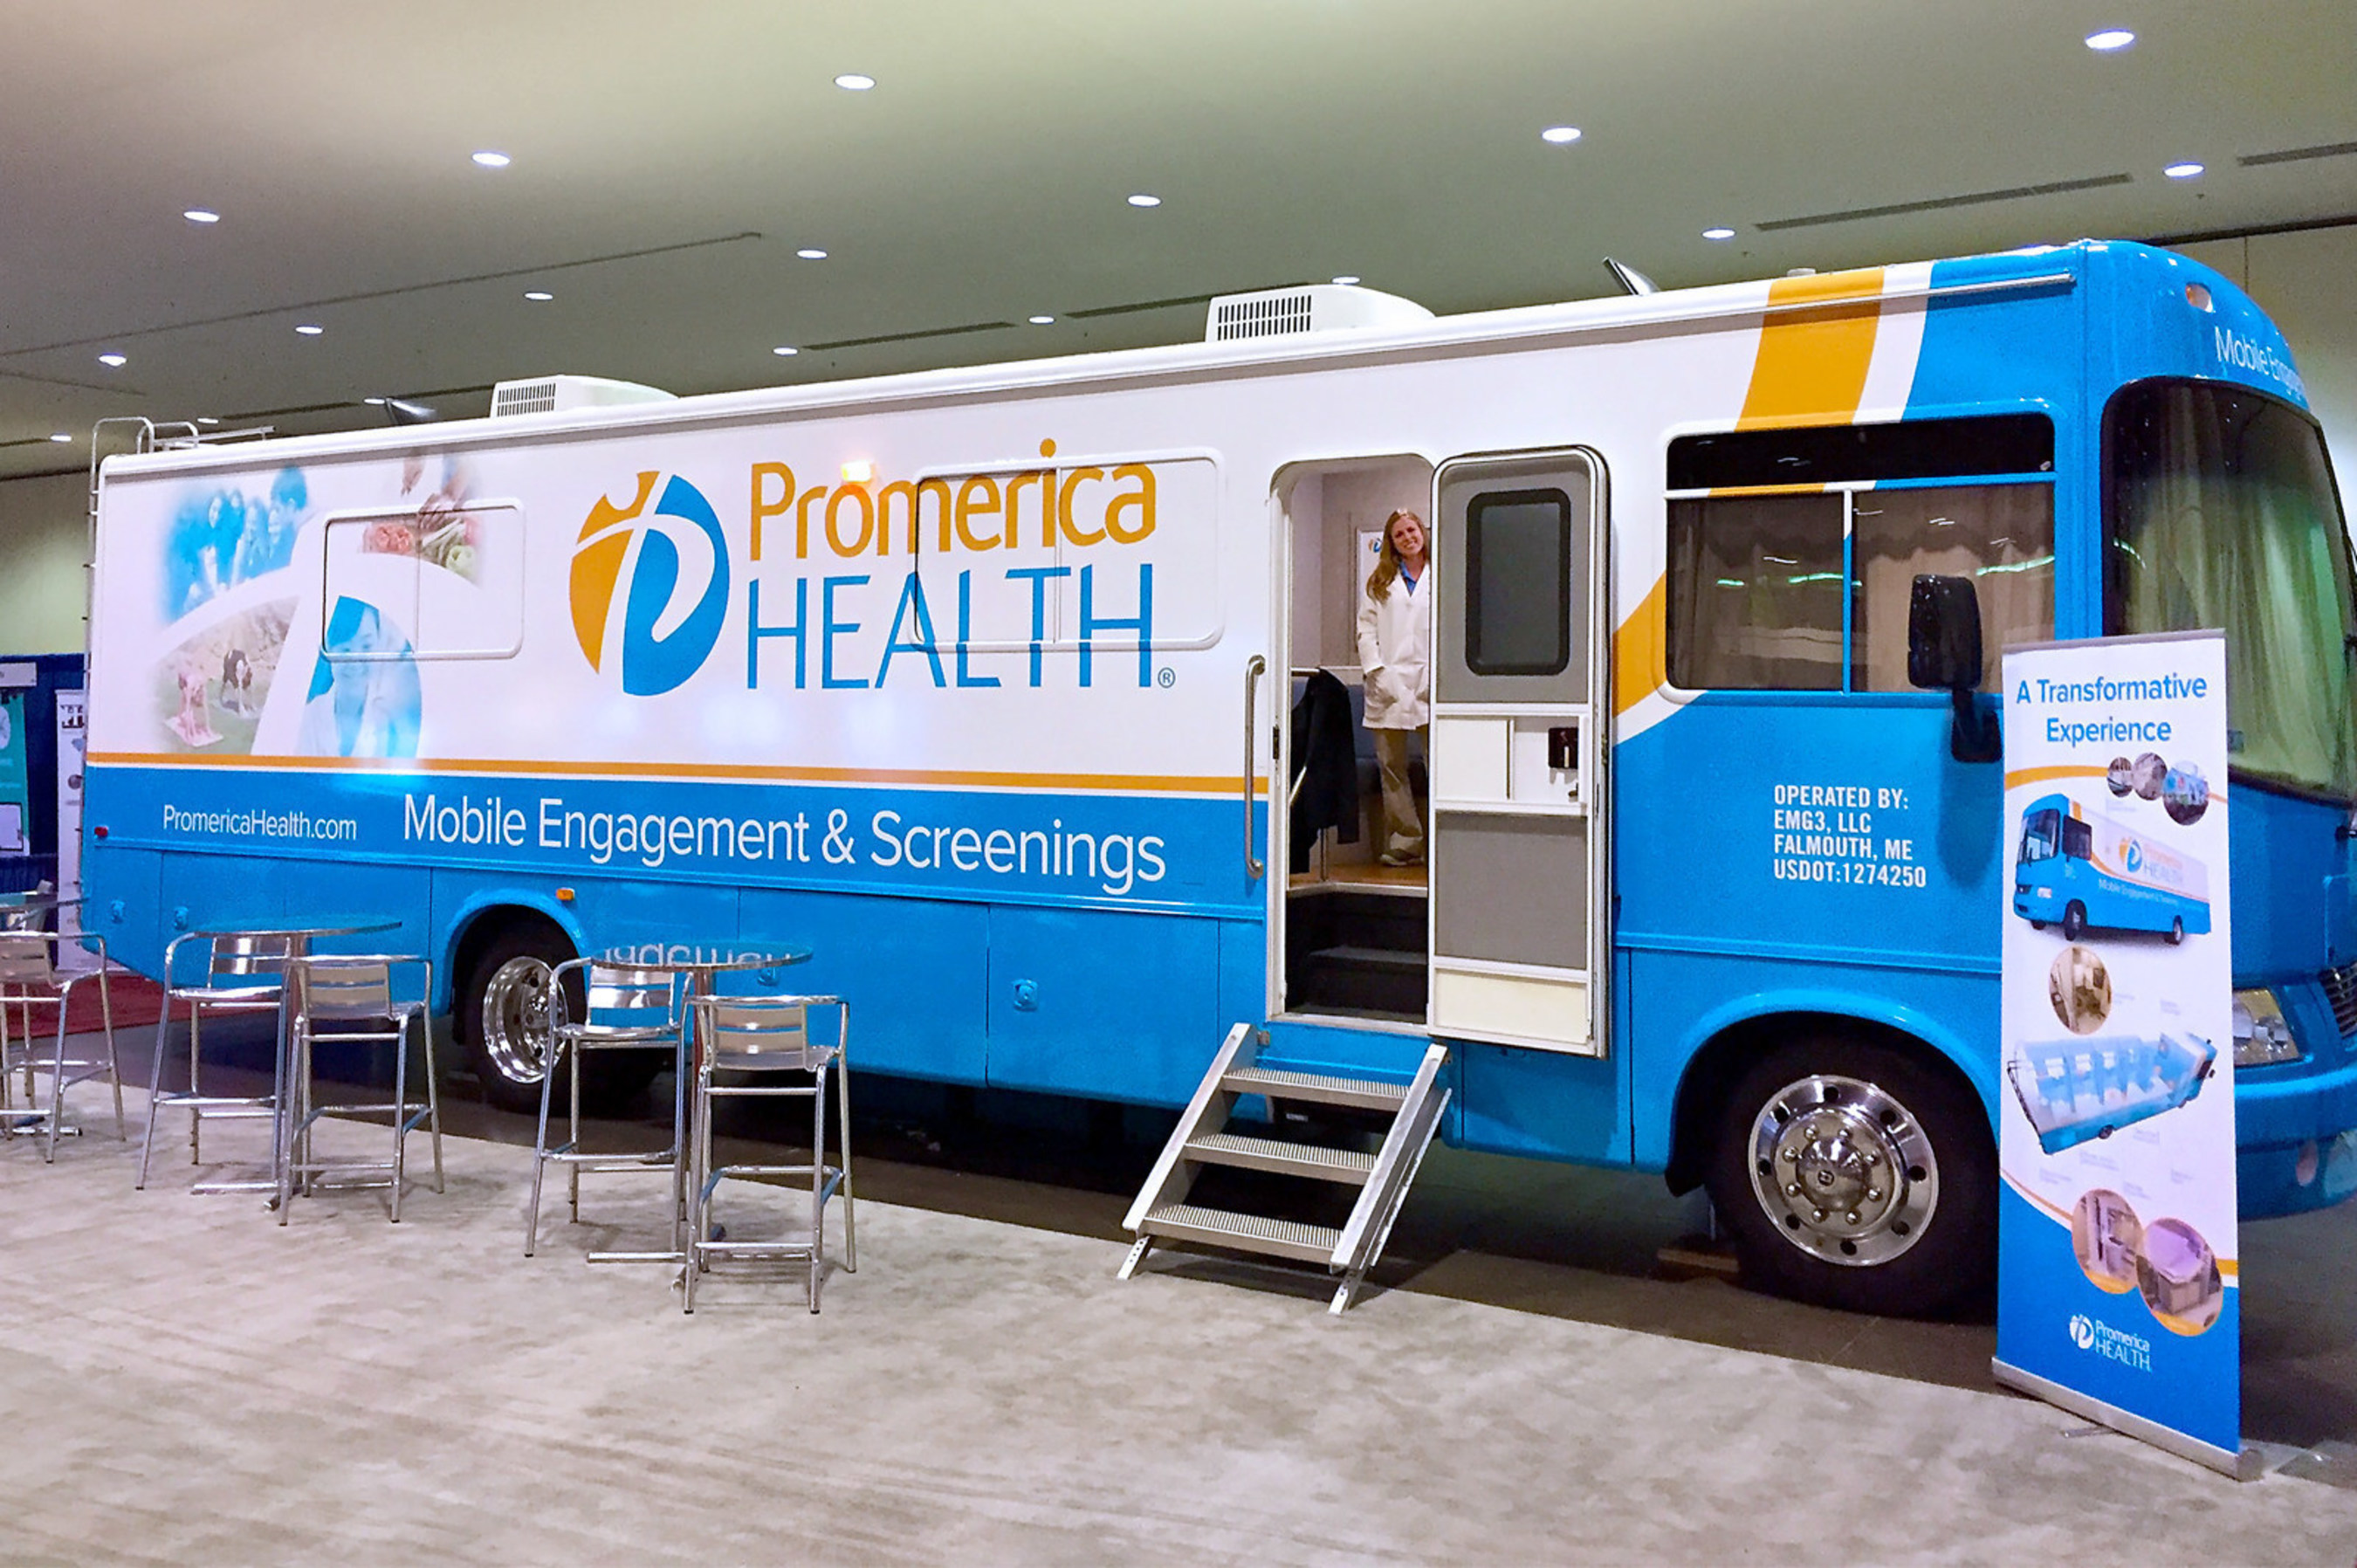 Employers interested in an on-site demonstration of the Promerica Health Mobile Health Unit or more information about health screening offerings should contact Keri Seitz, Vice President Compliance & Communications, at 207-828-4700 or seitzk@promericahealth.com.